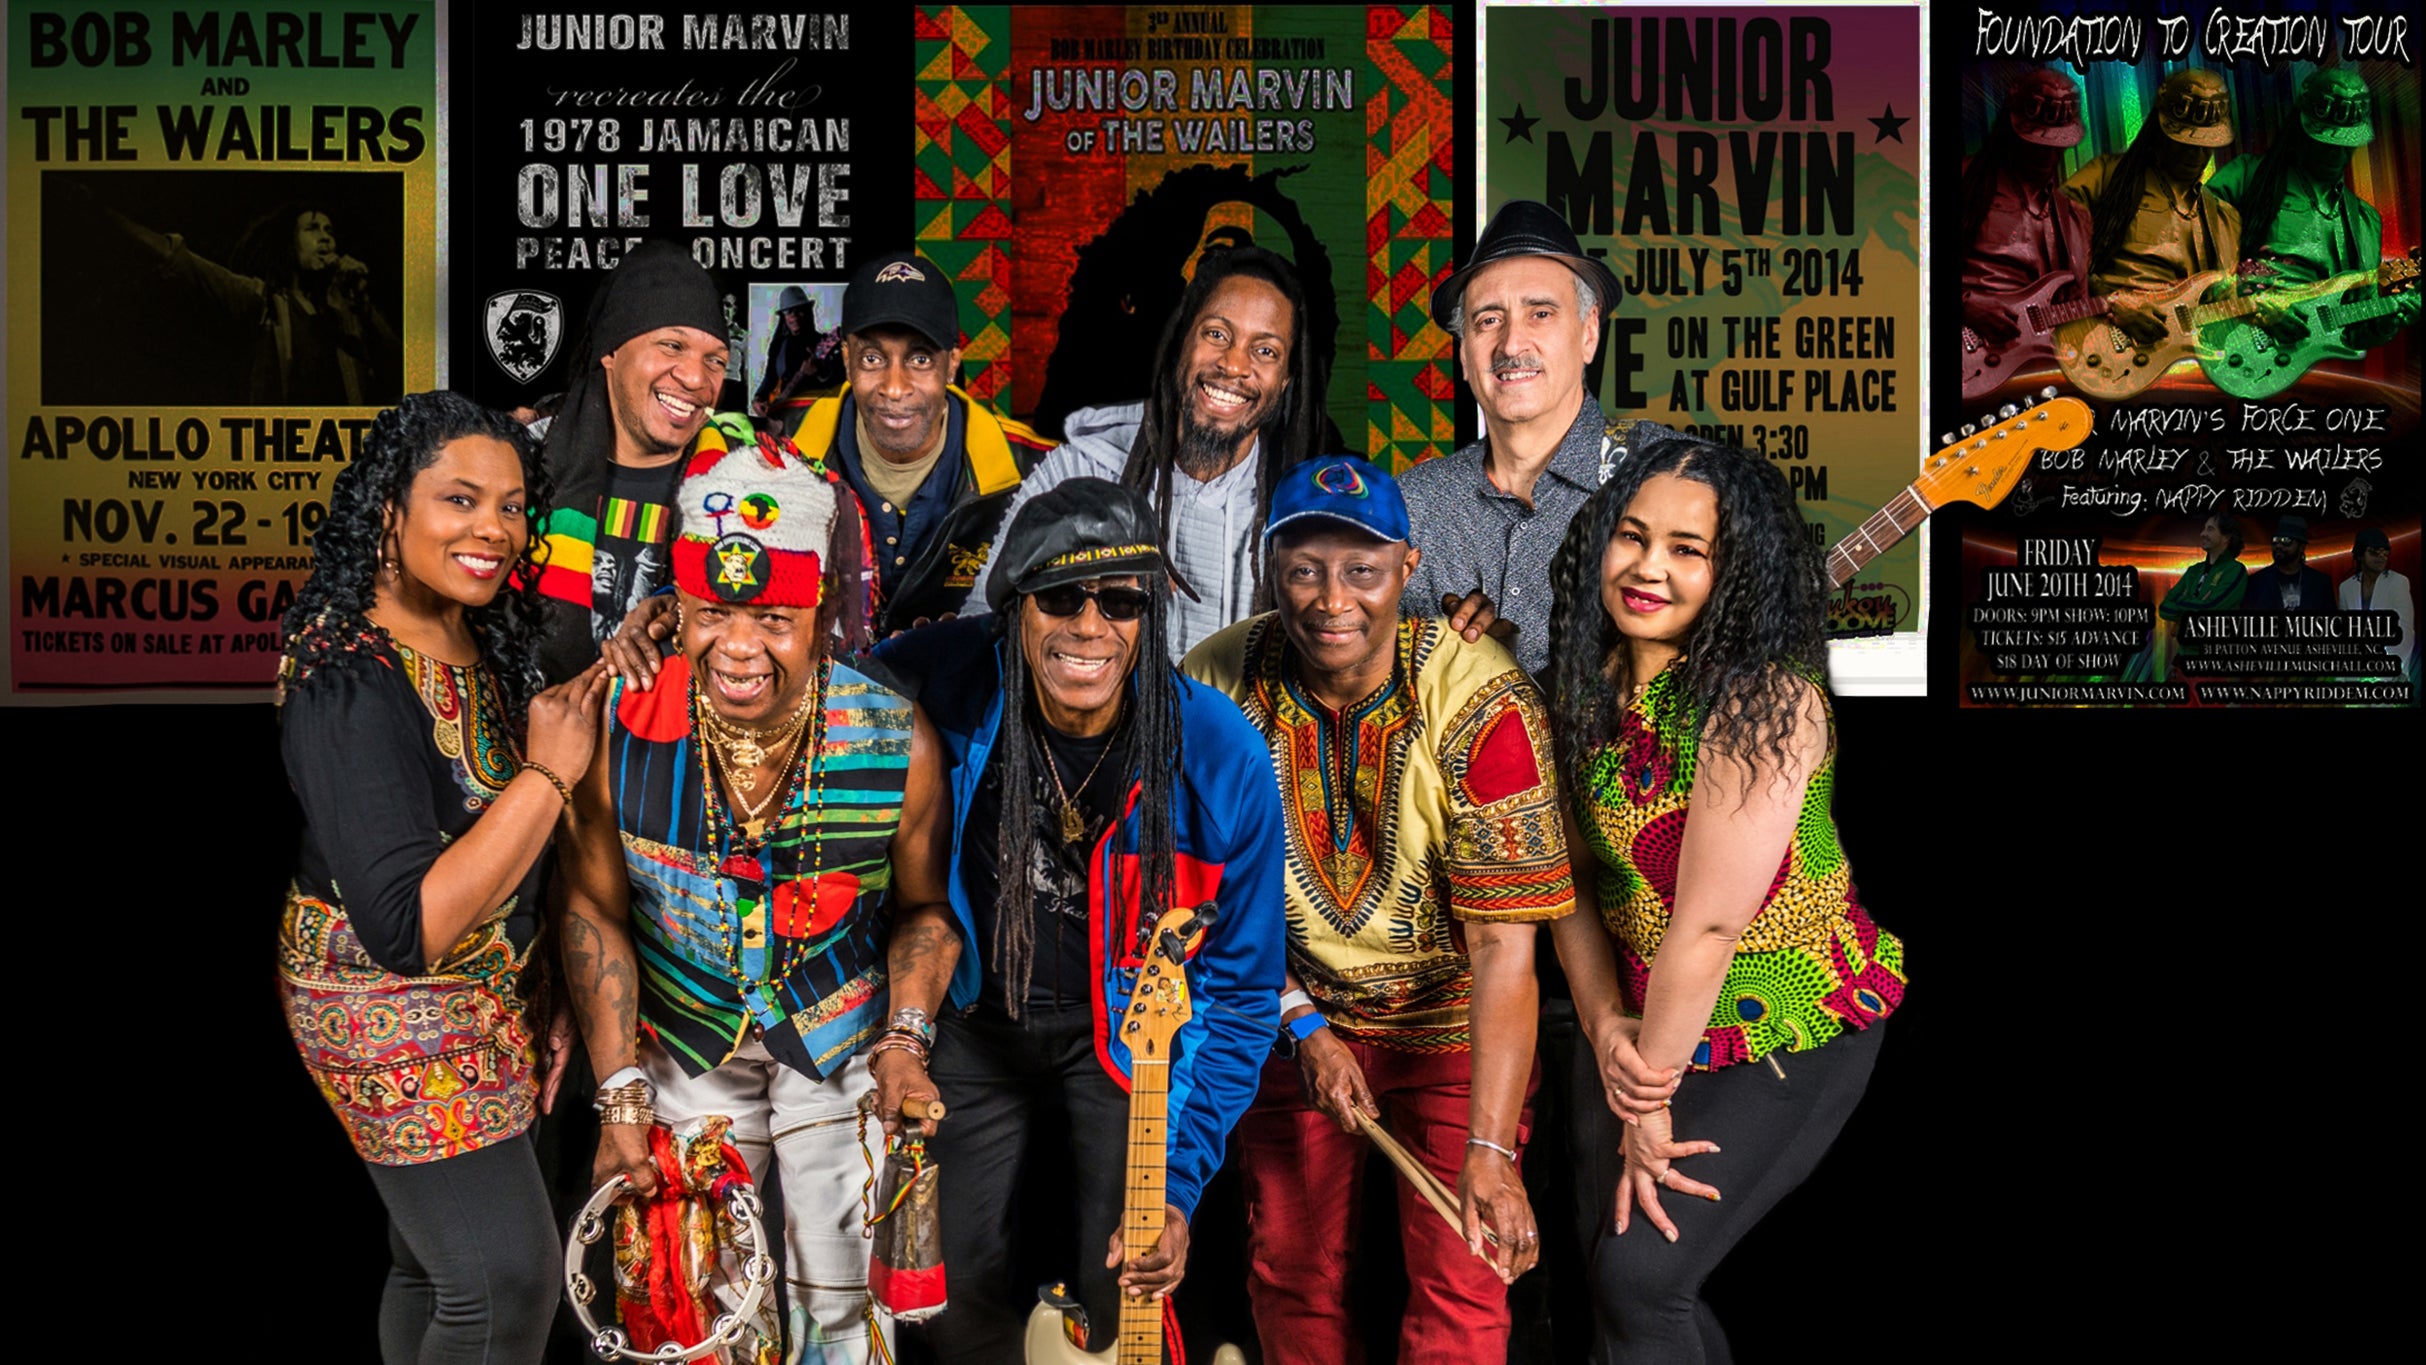 Junior Marvin & The Legendary Wailers in Huntington promo photo for Venue presale offer code